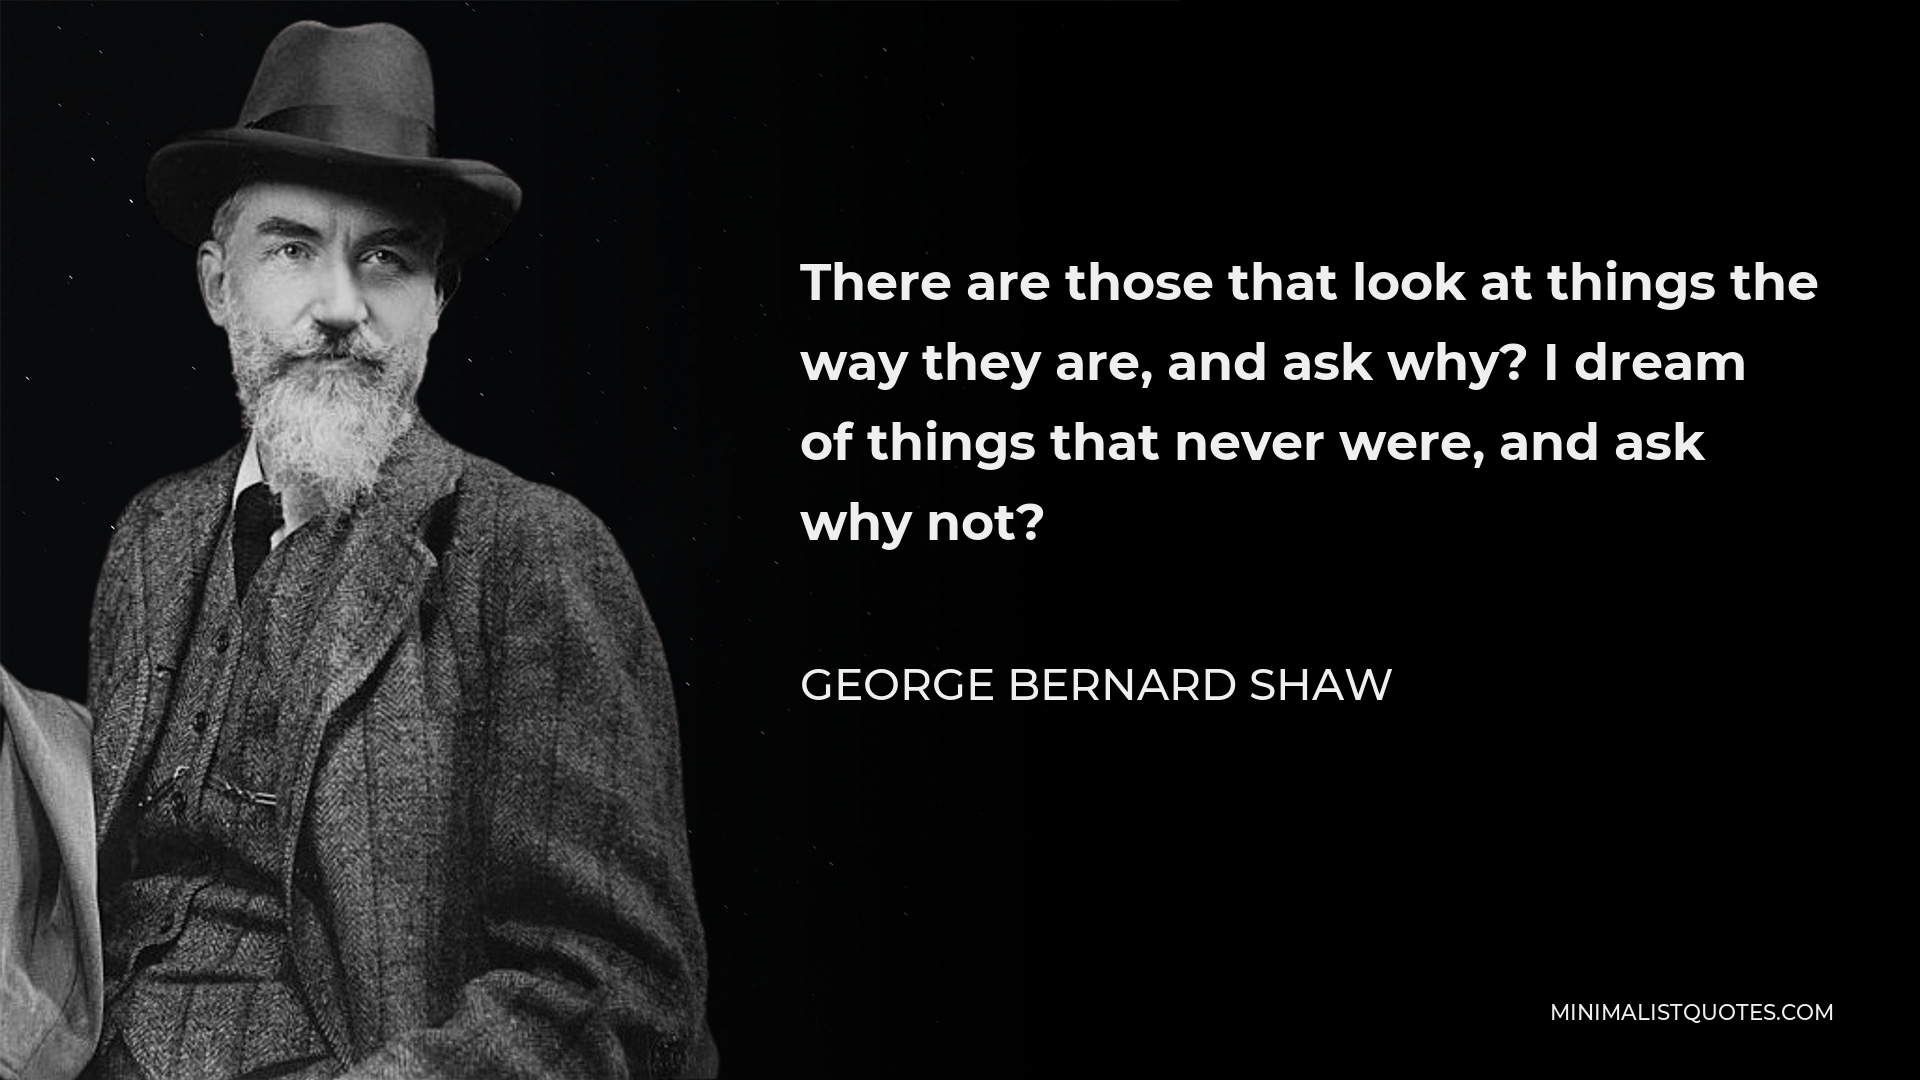 George Bernard Shaw Quote - There are those that look at things the way they are, and ask why? I dream of things that never were, and ask why not?